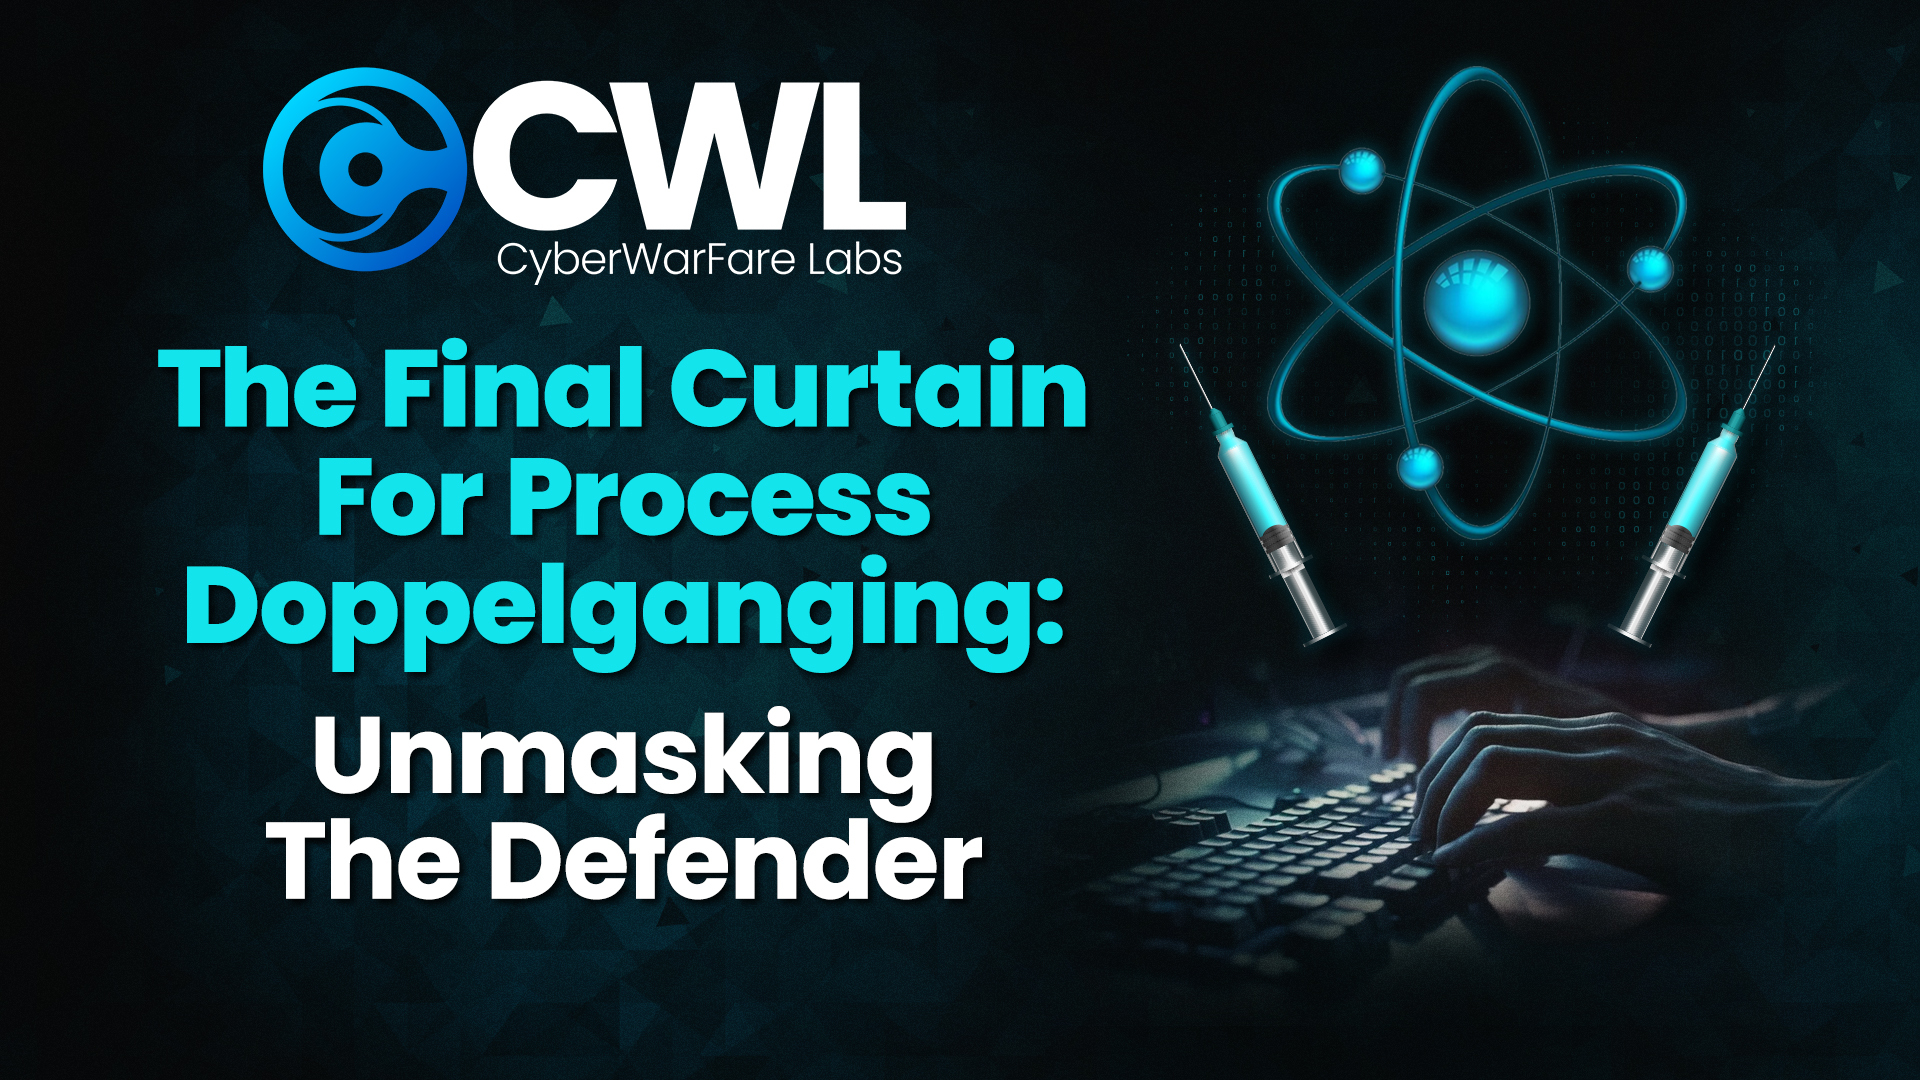 The Final Curtain for Process Doppelganging: Unmasking the Defender